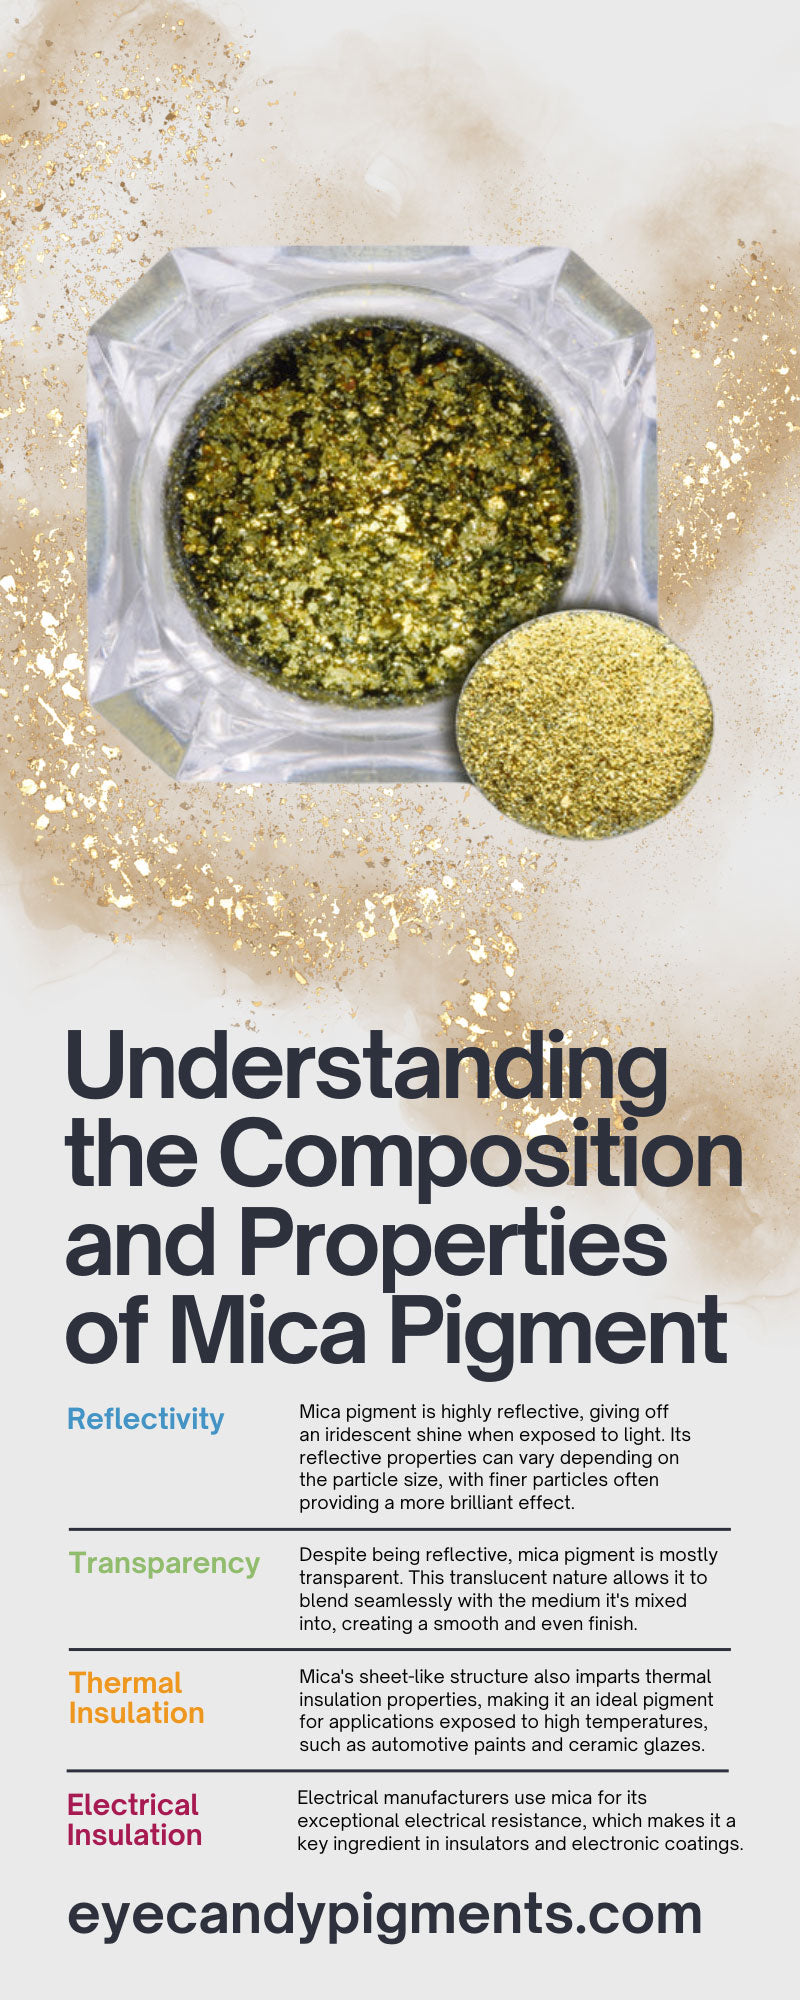 Understanding the Composition and Properties of Mica Pigment